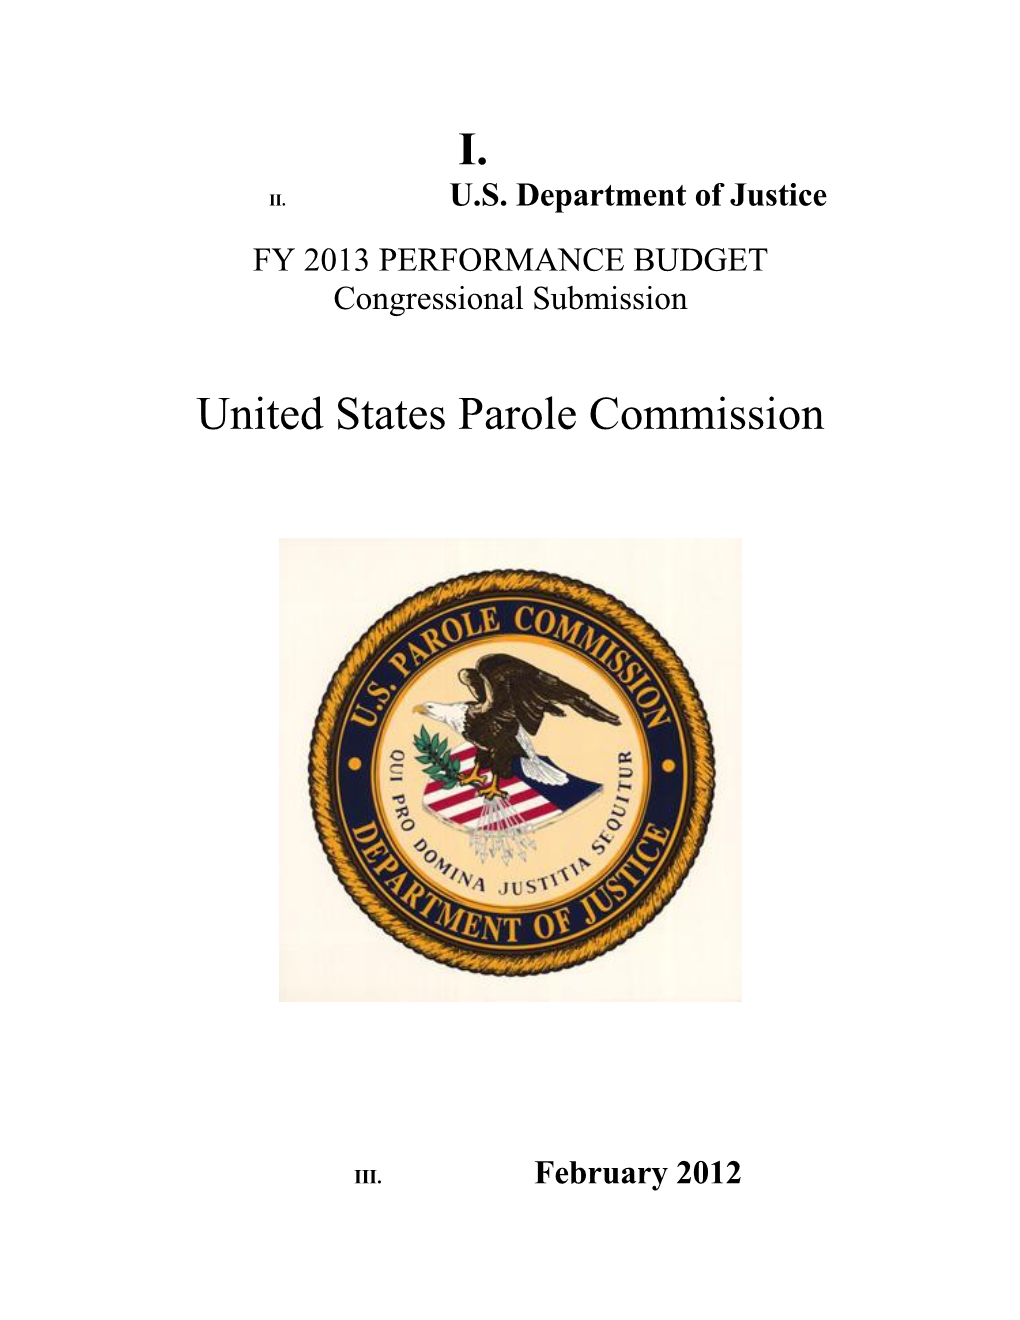 The FY 2001 Budget Request for the United States Parole Commission (USPC) Is $9,183,000